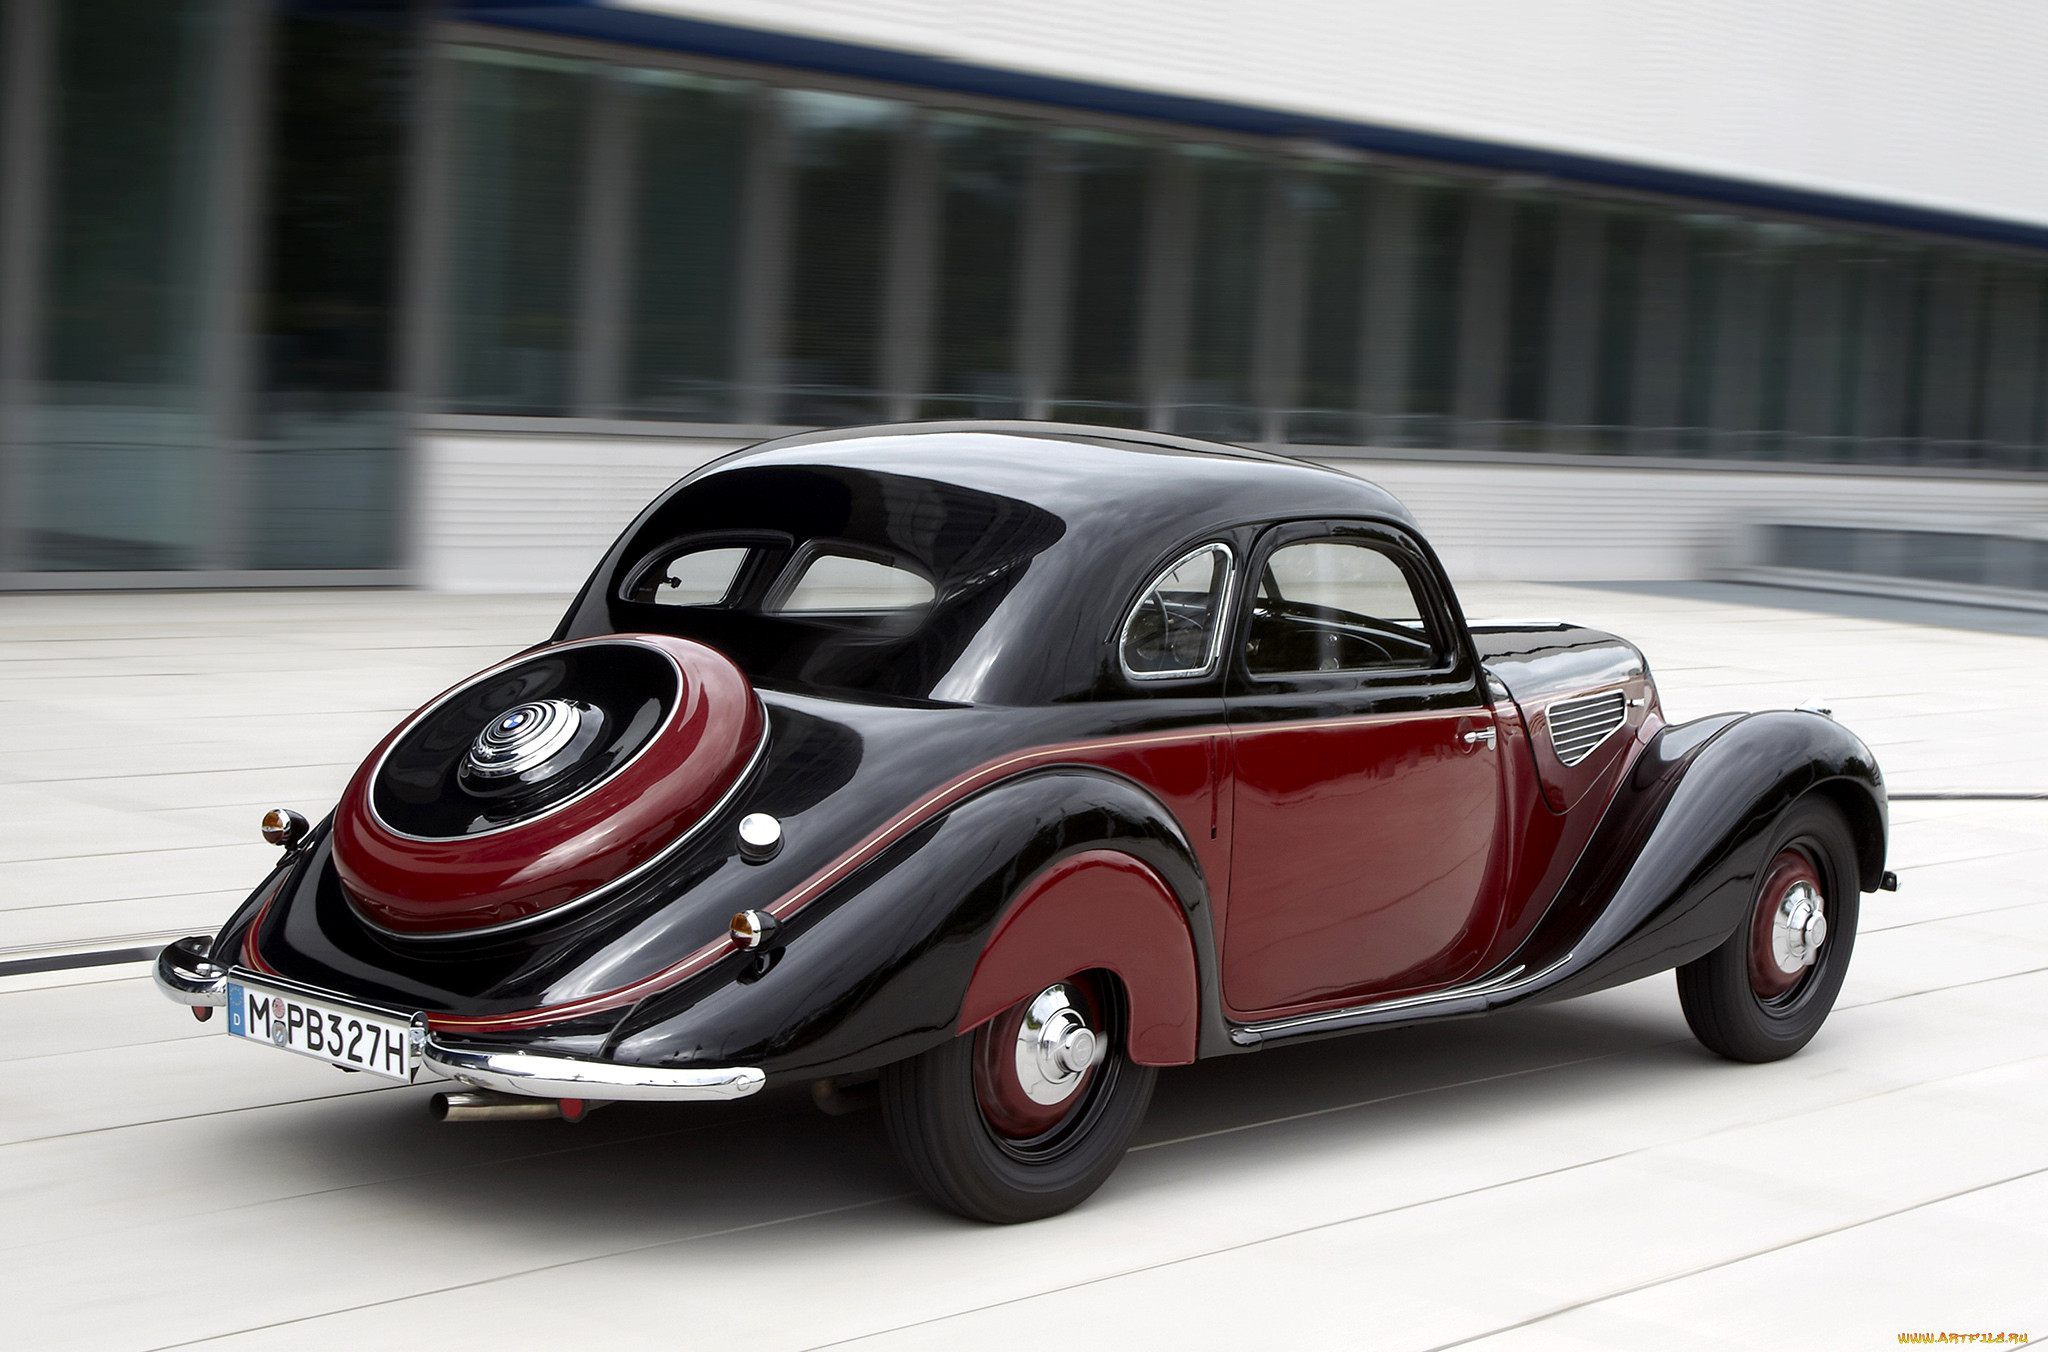 bmw 327 coupe 1937, , bmw, 1937, coupe, 327